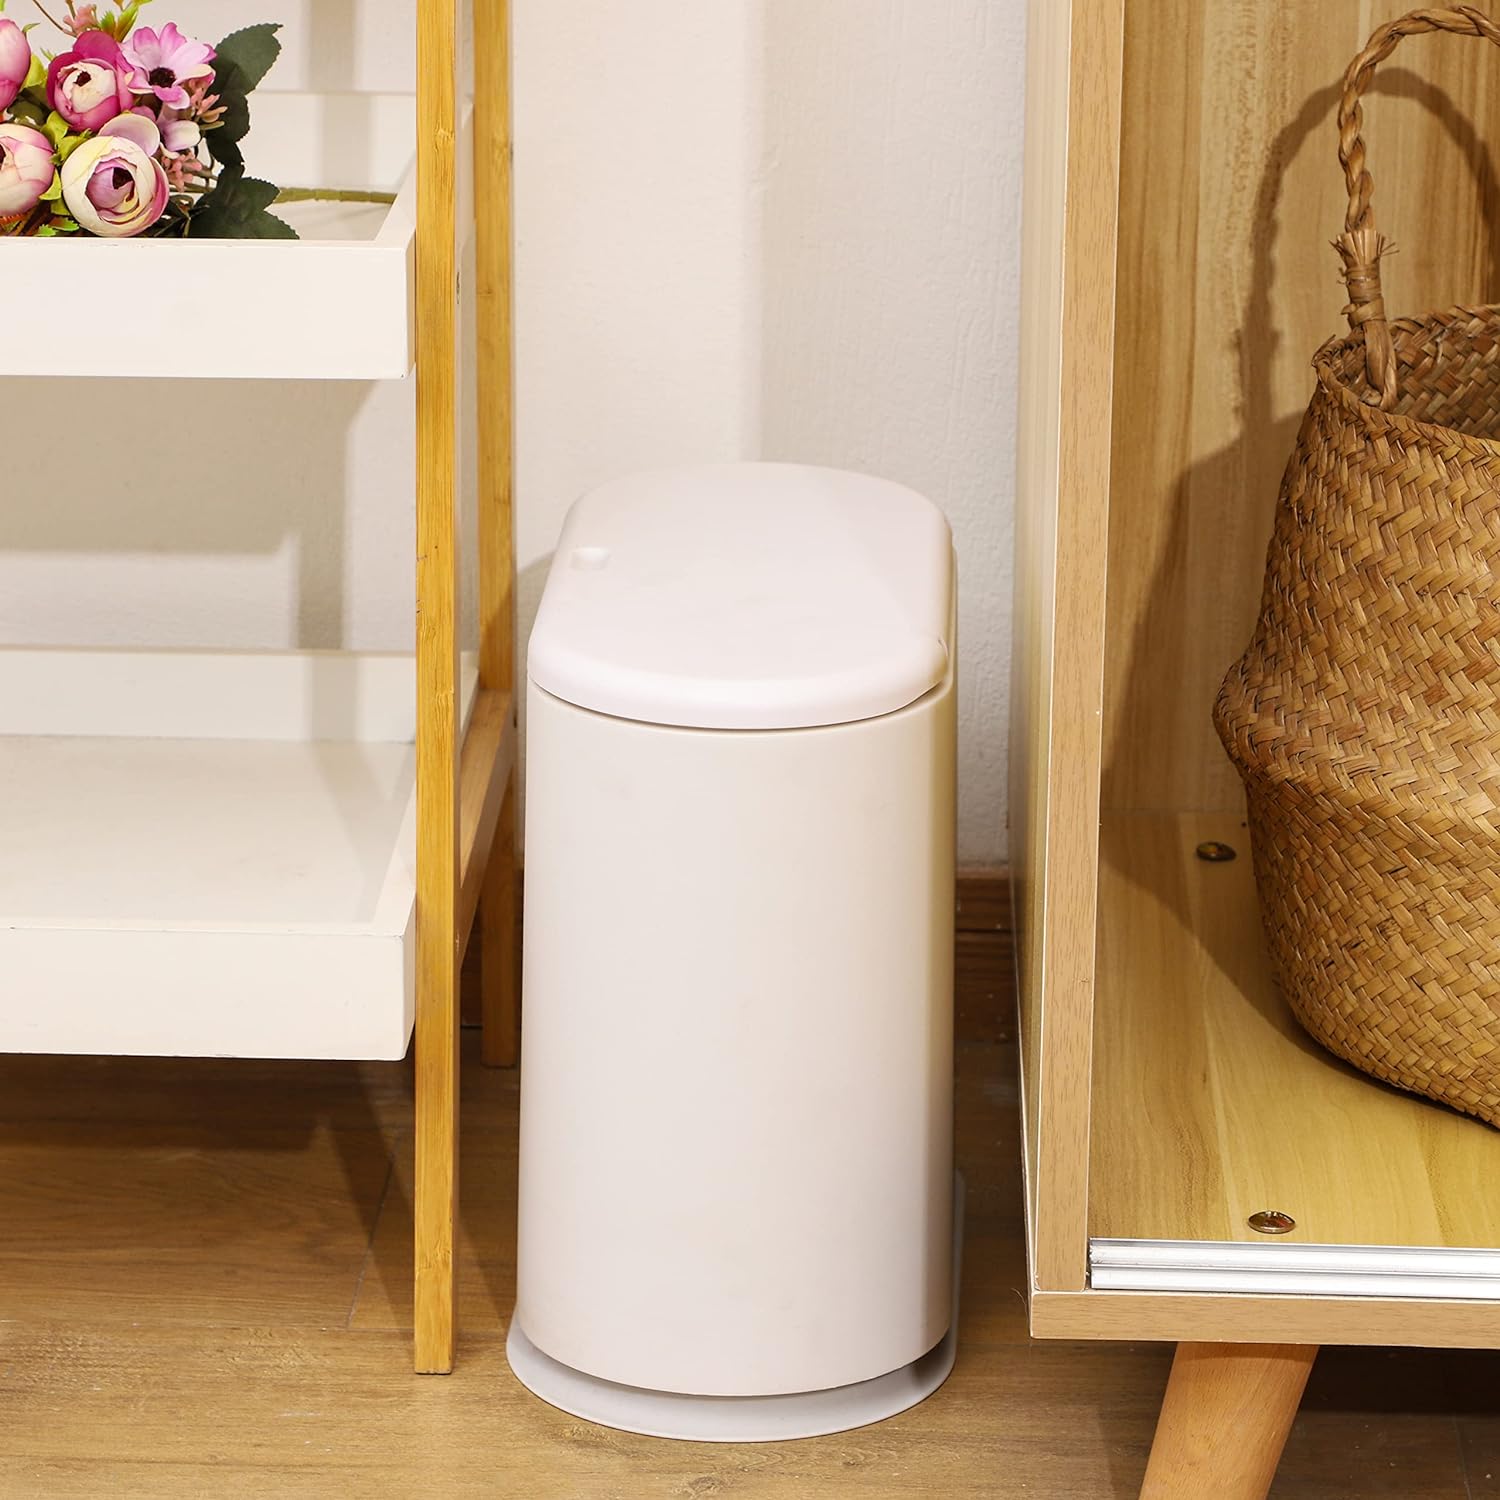 Best garbage can for narrow spaces